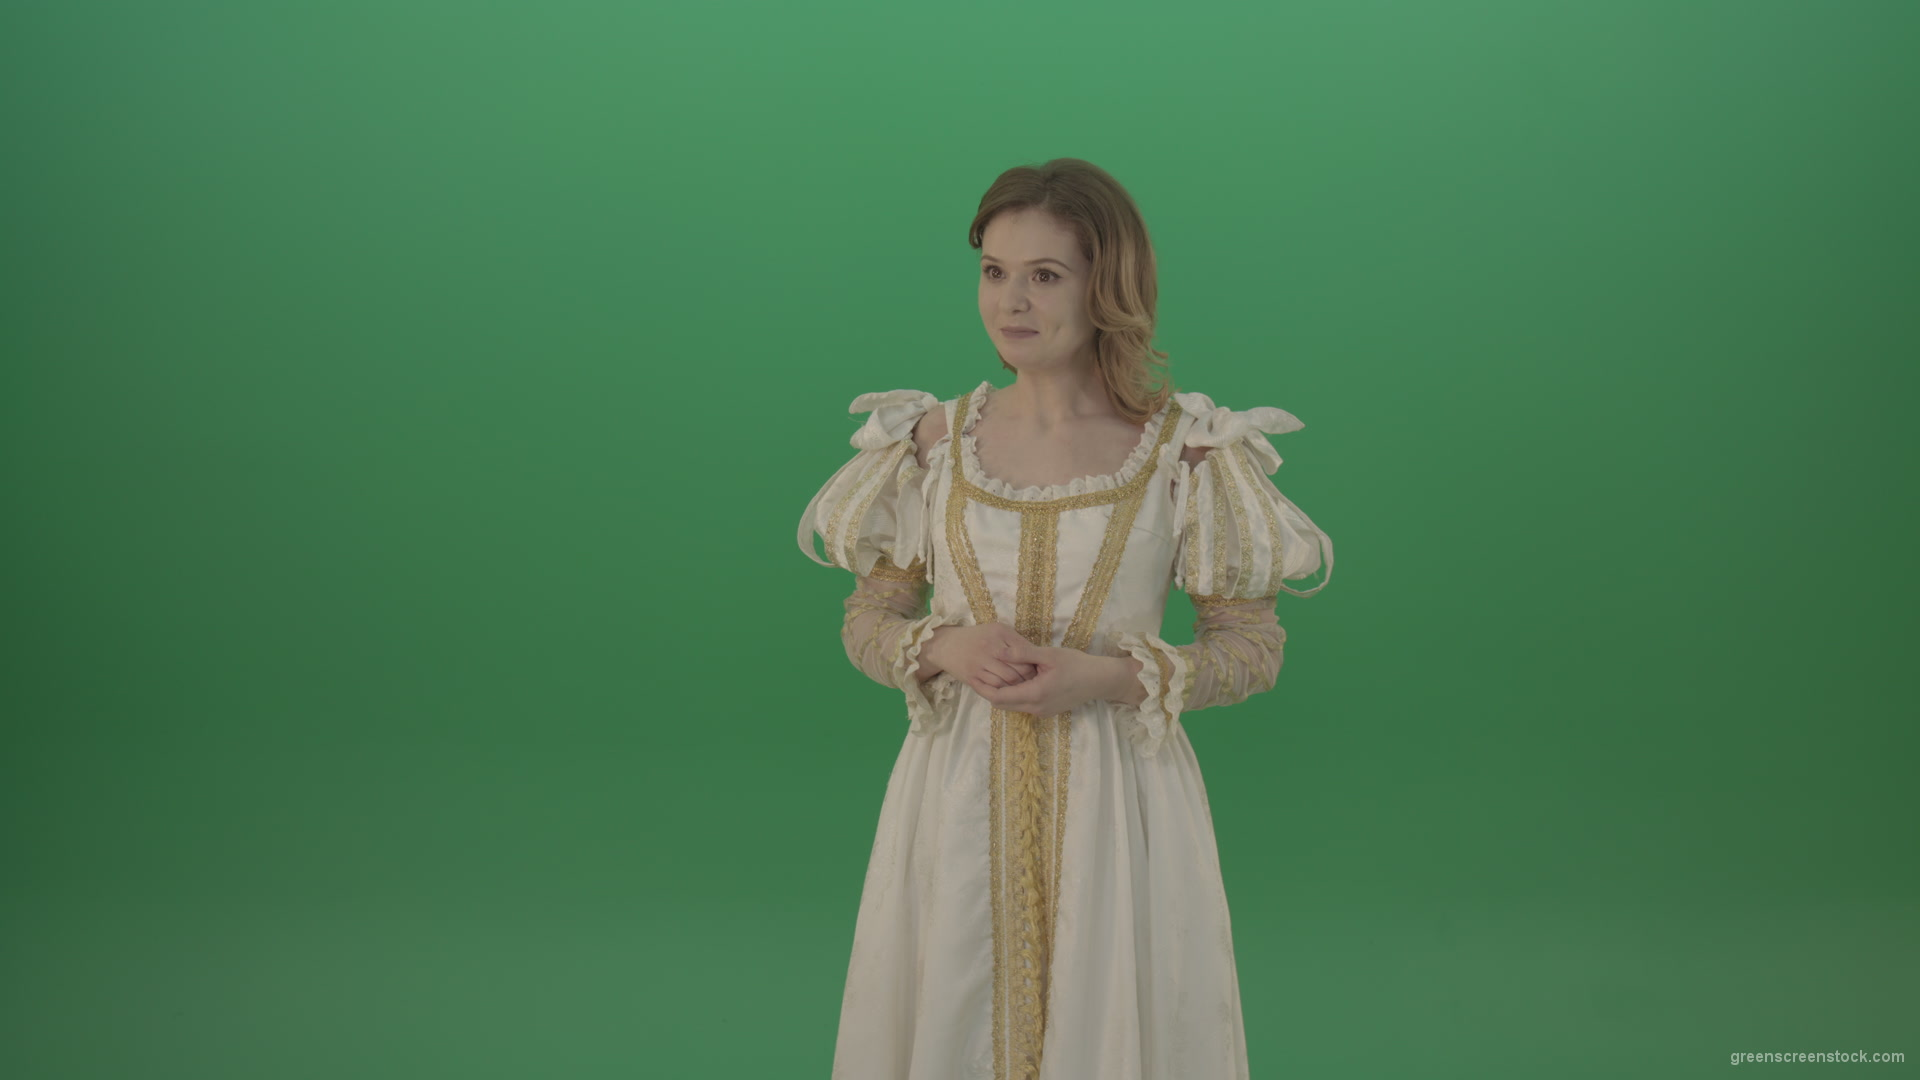 Medieval-girl-in-a-white-suit-looking-far-away-isolated-on-green-background_005 Green Screen Stock